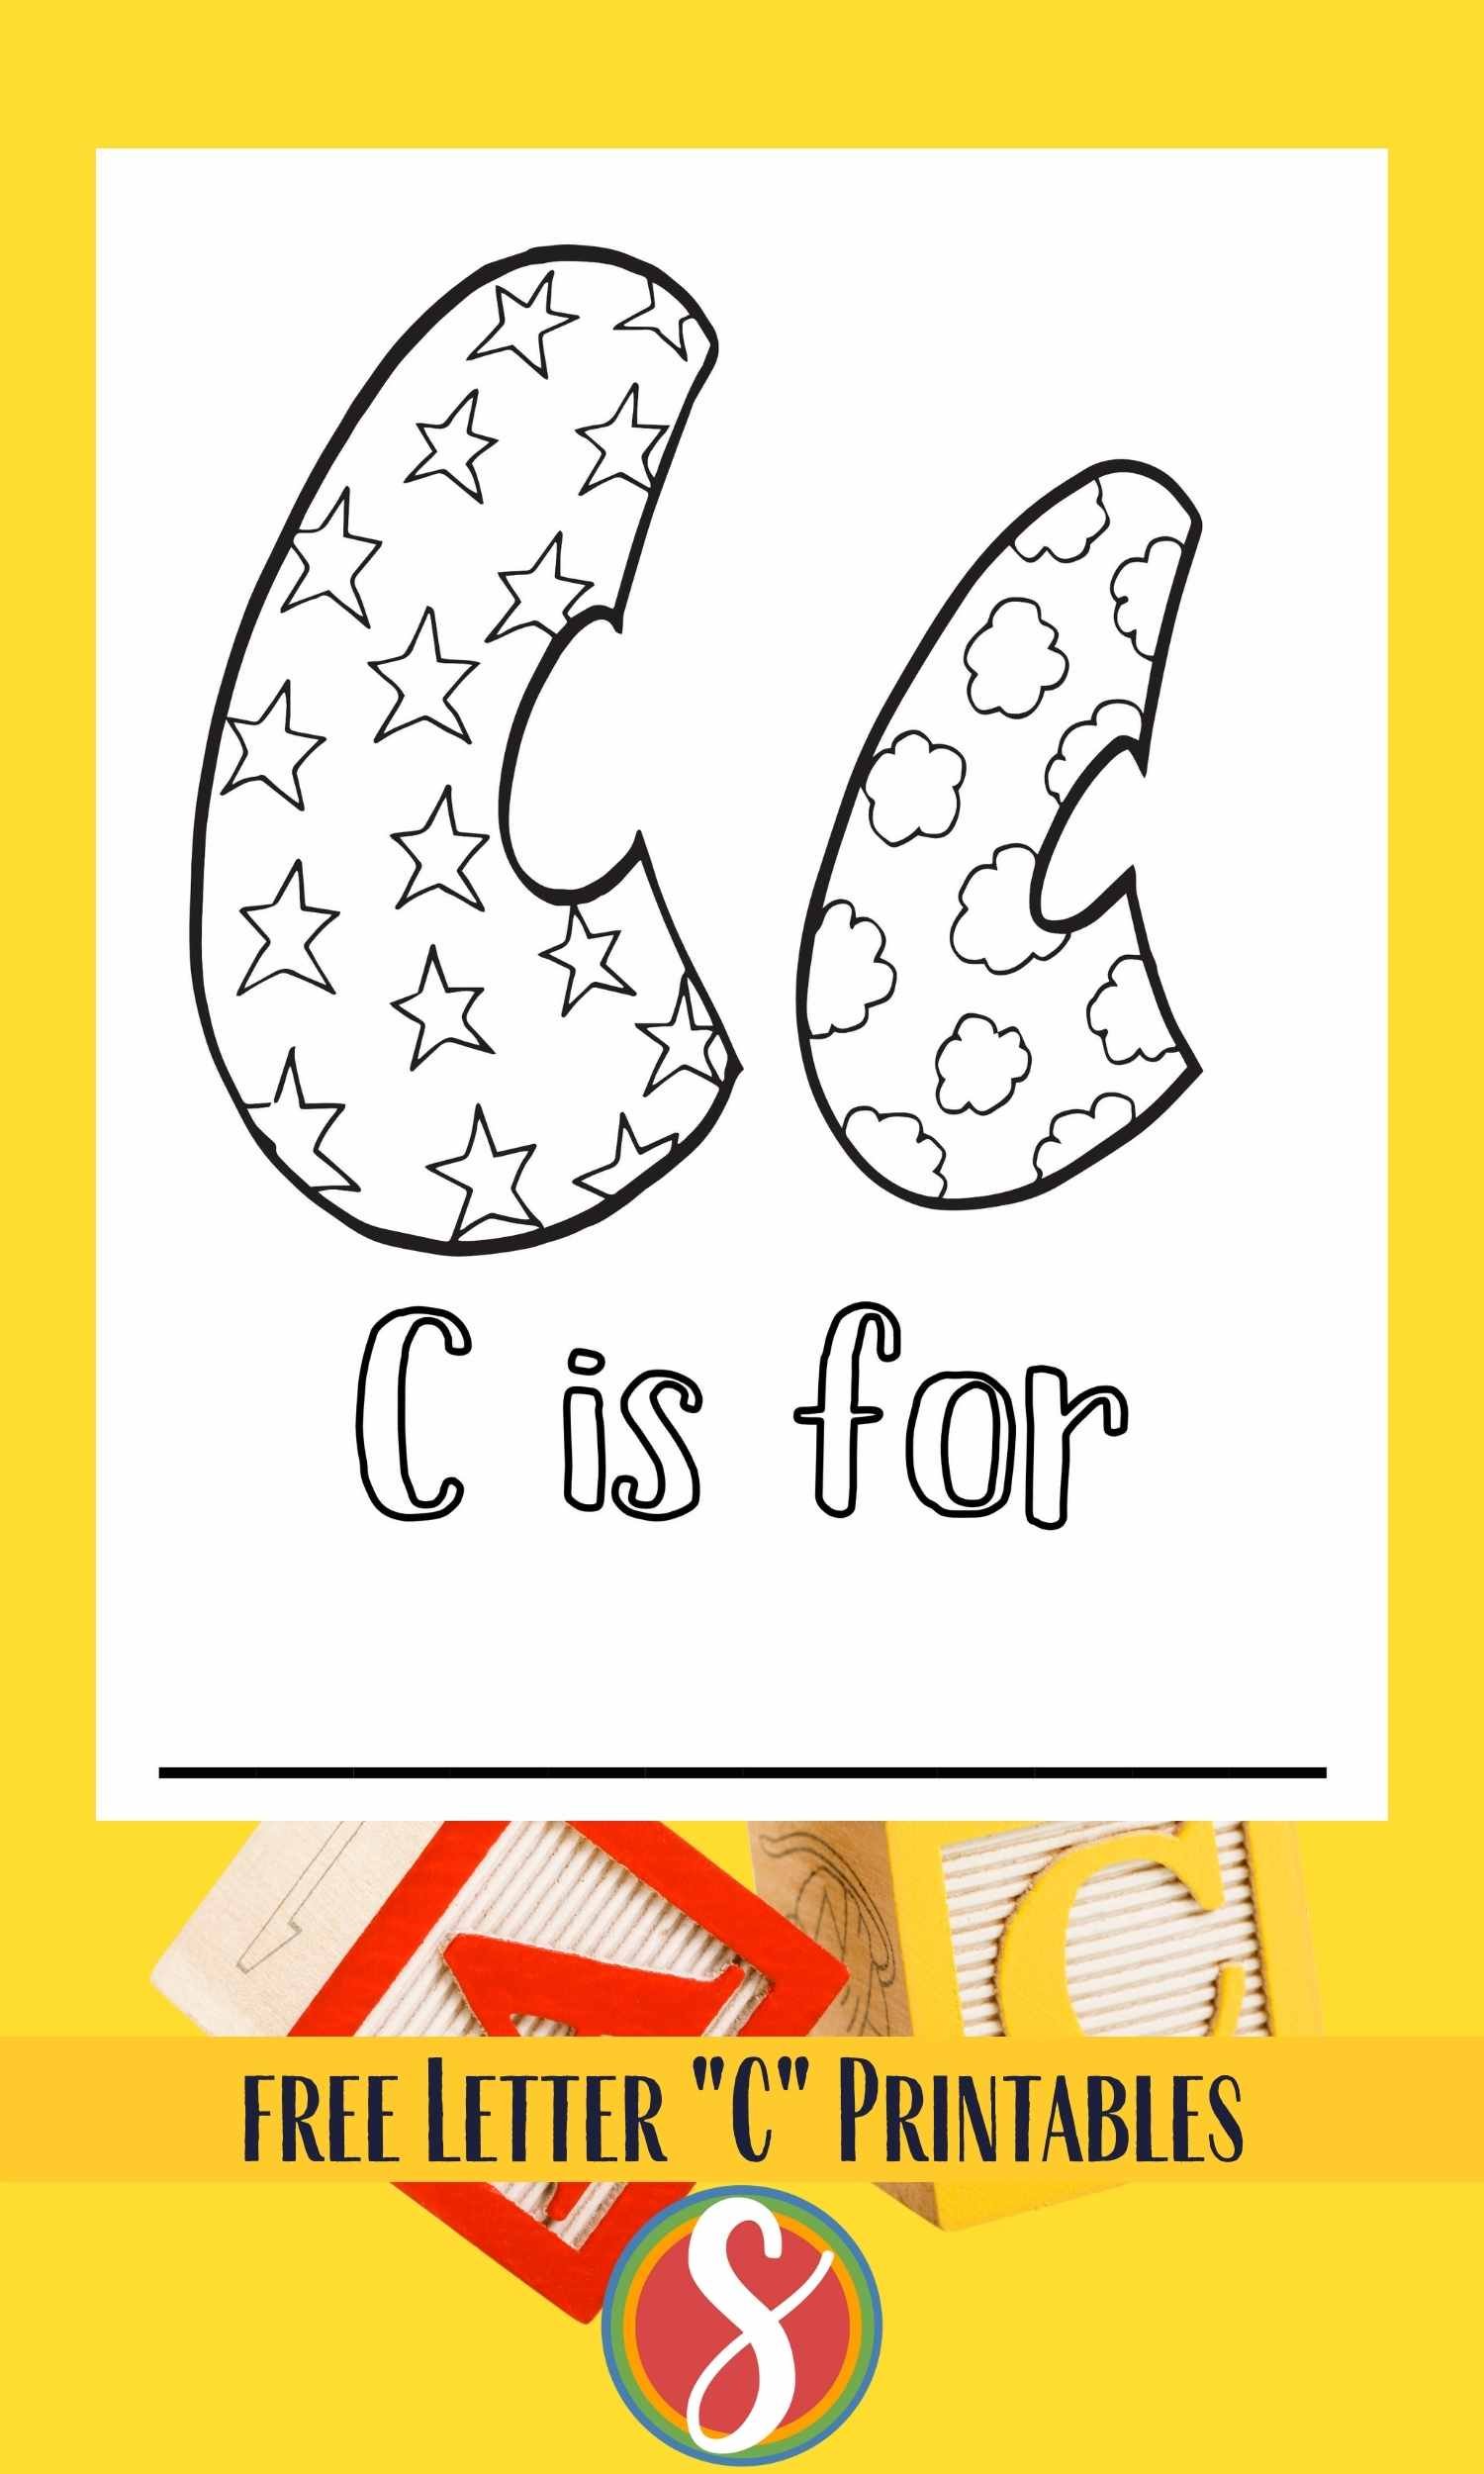 Big letter C with stars inside to color, small letter c with little clouds inside to color